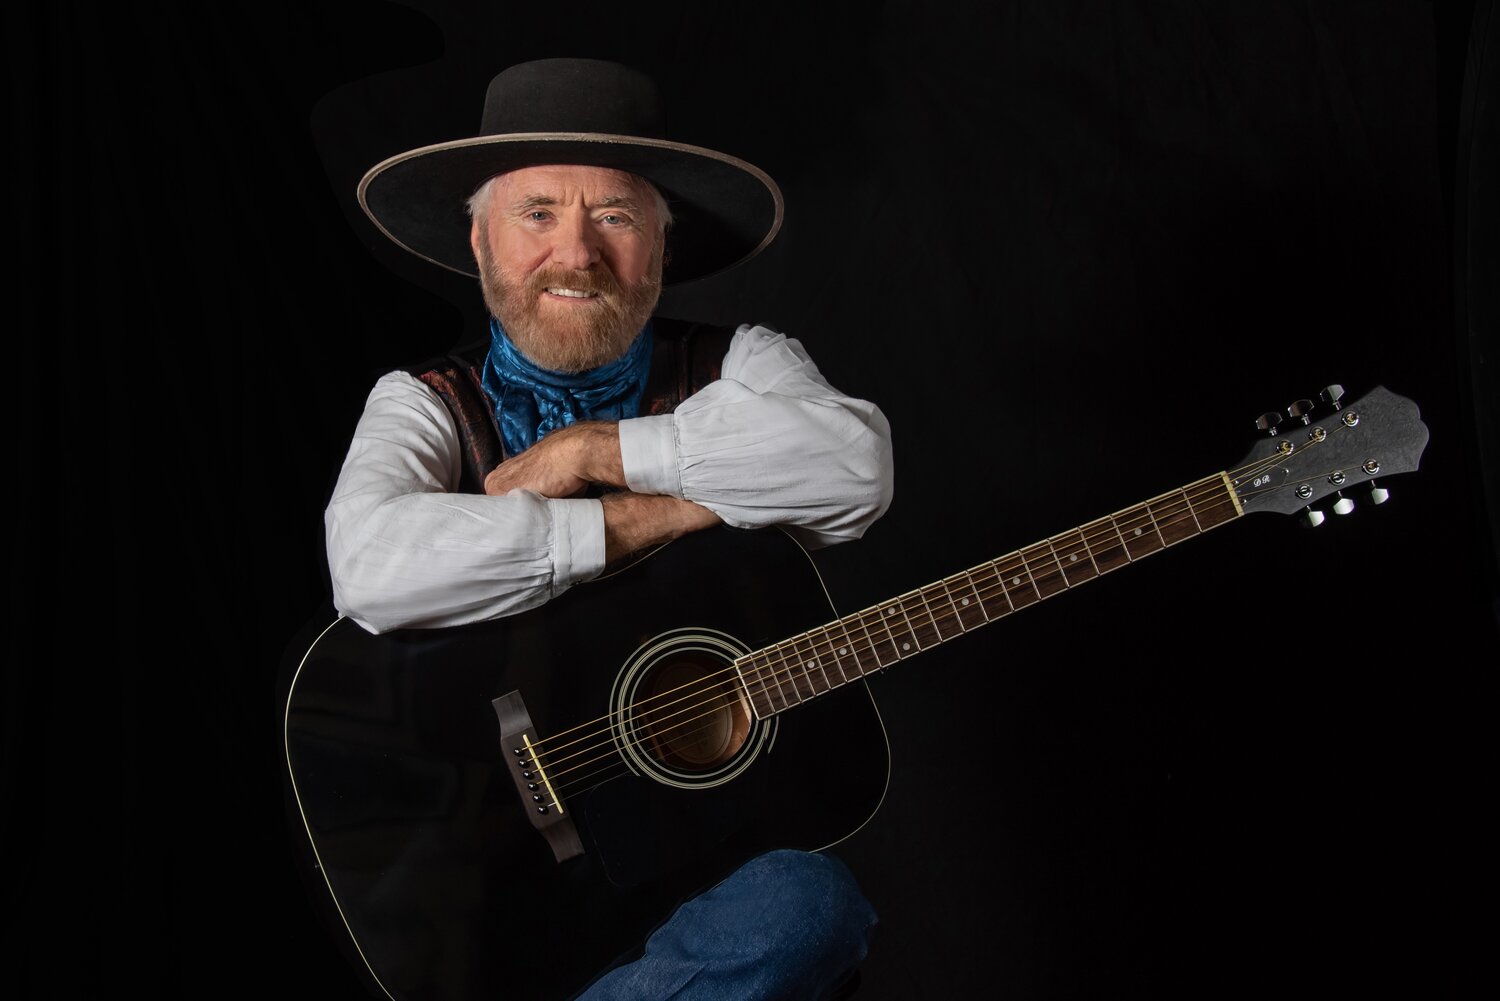 Wildfire' by Michael Martin Murphey: Story Behind the Song